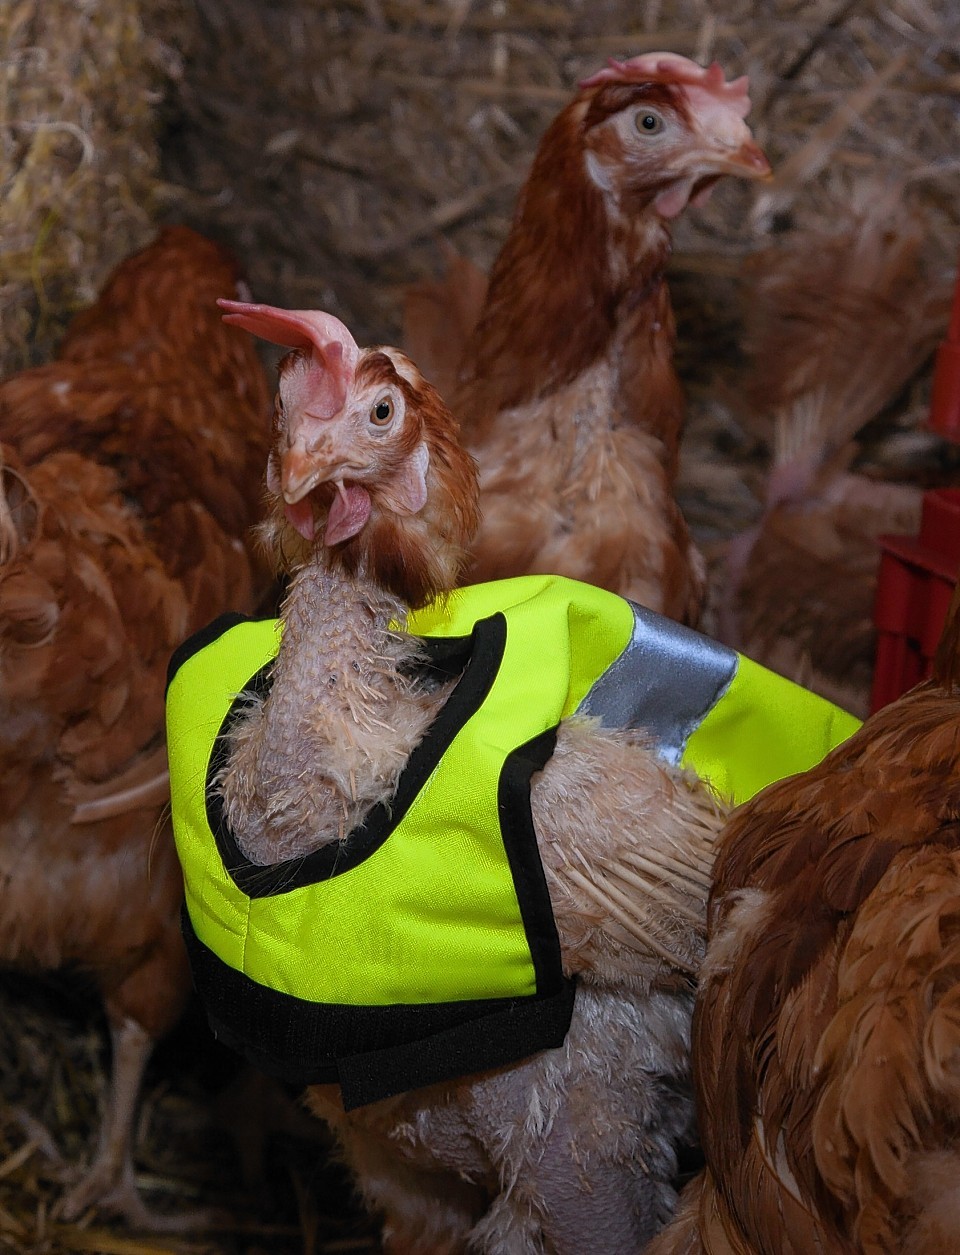 The chicken today perhaps could have done with a hi-vis vest.